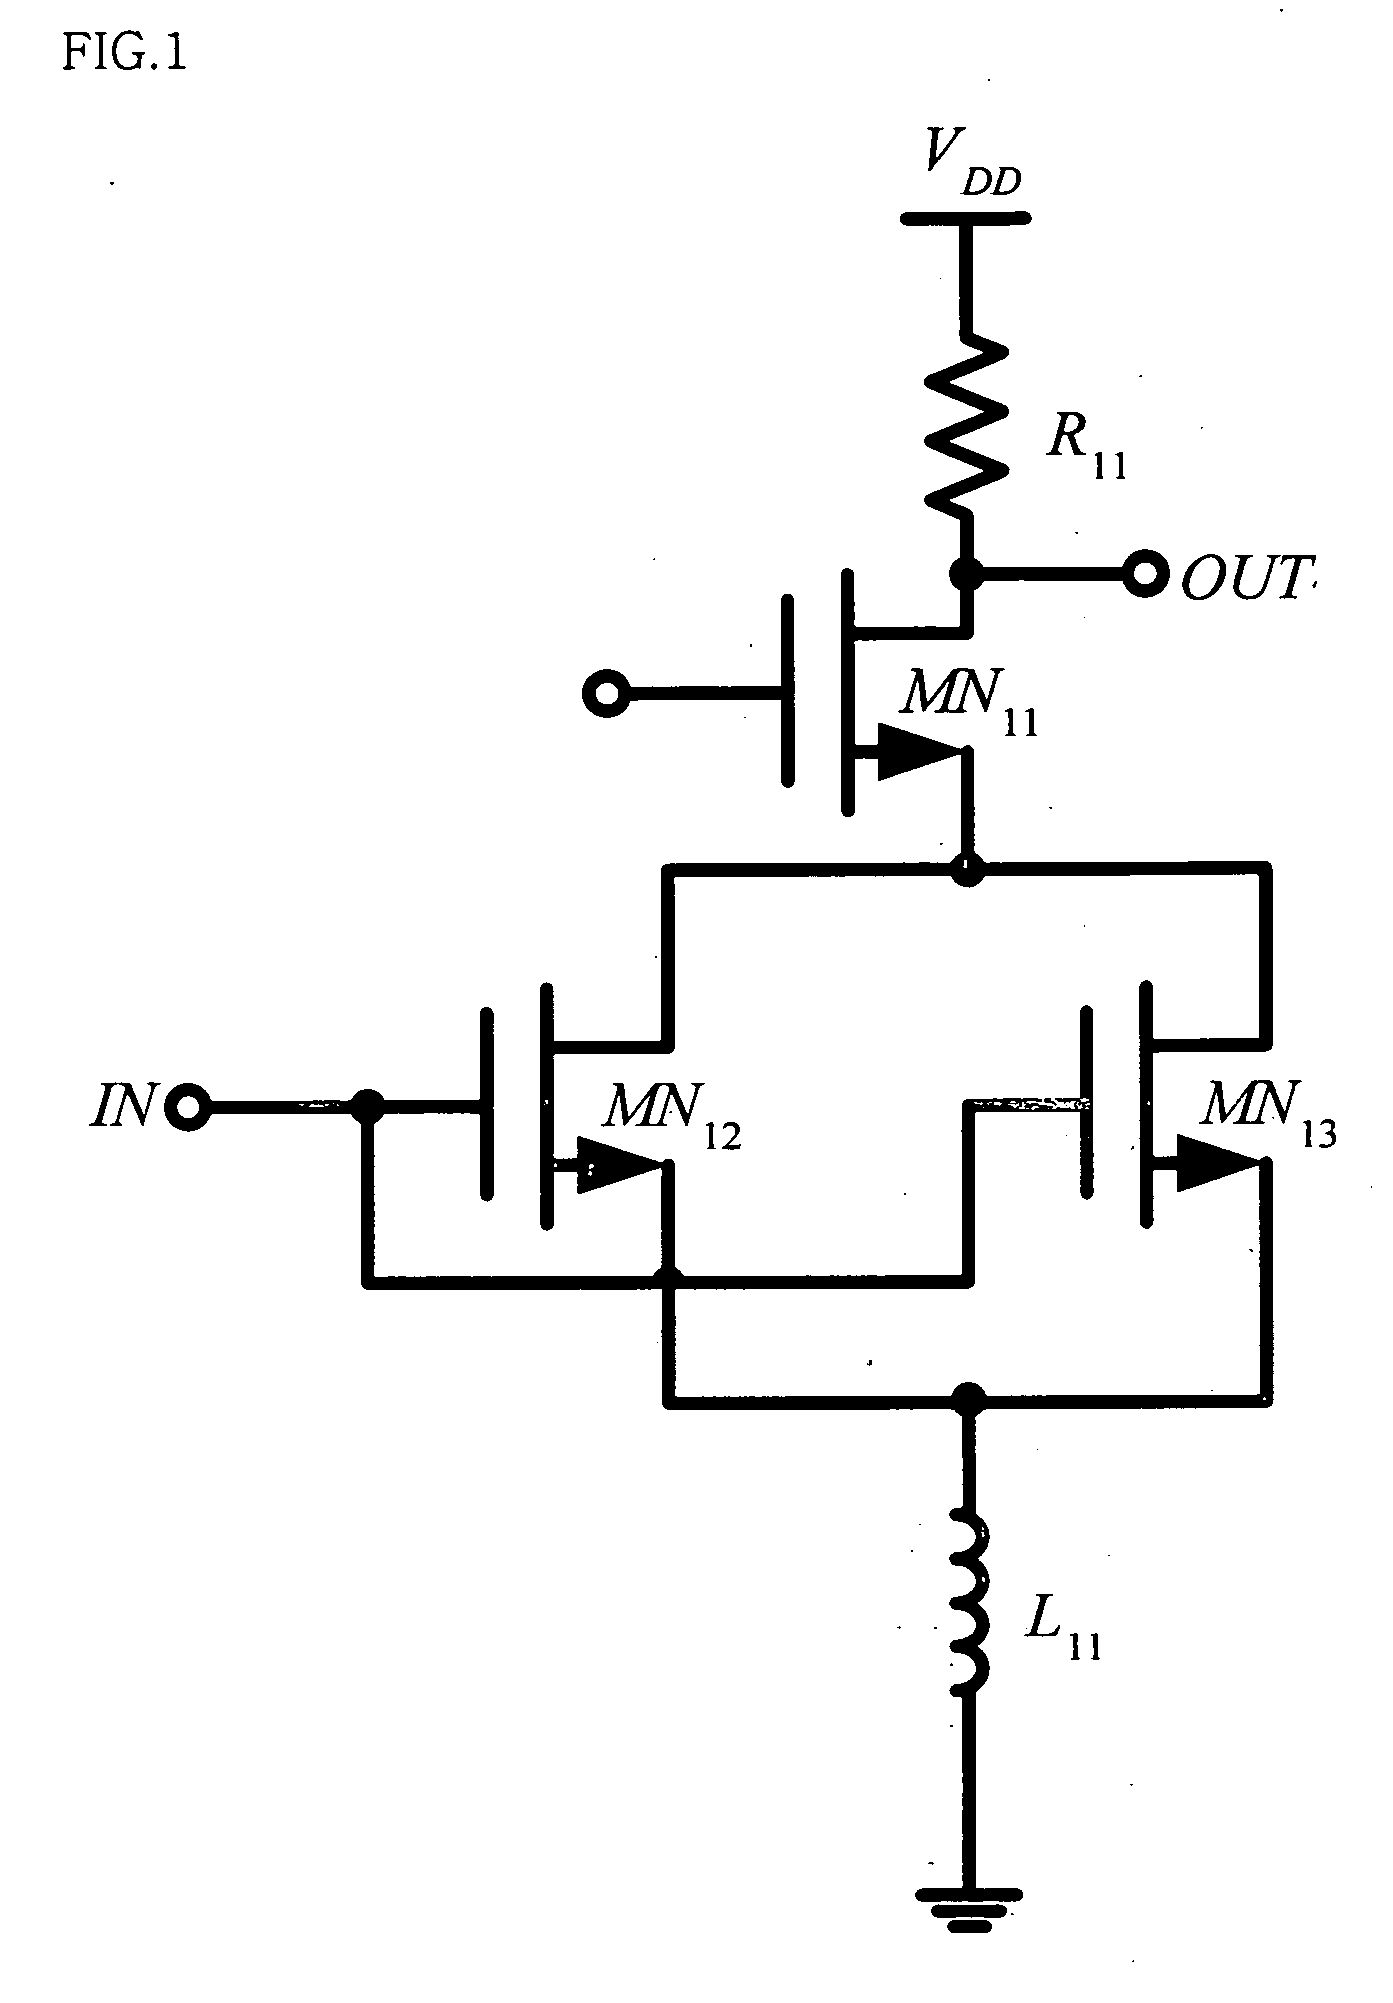 Amplifier circuit having improved linearity and frequency band using multiple gated transistor